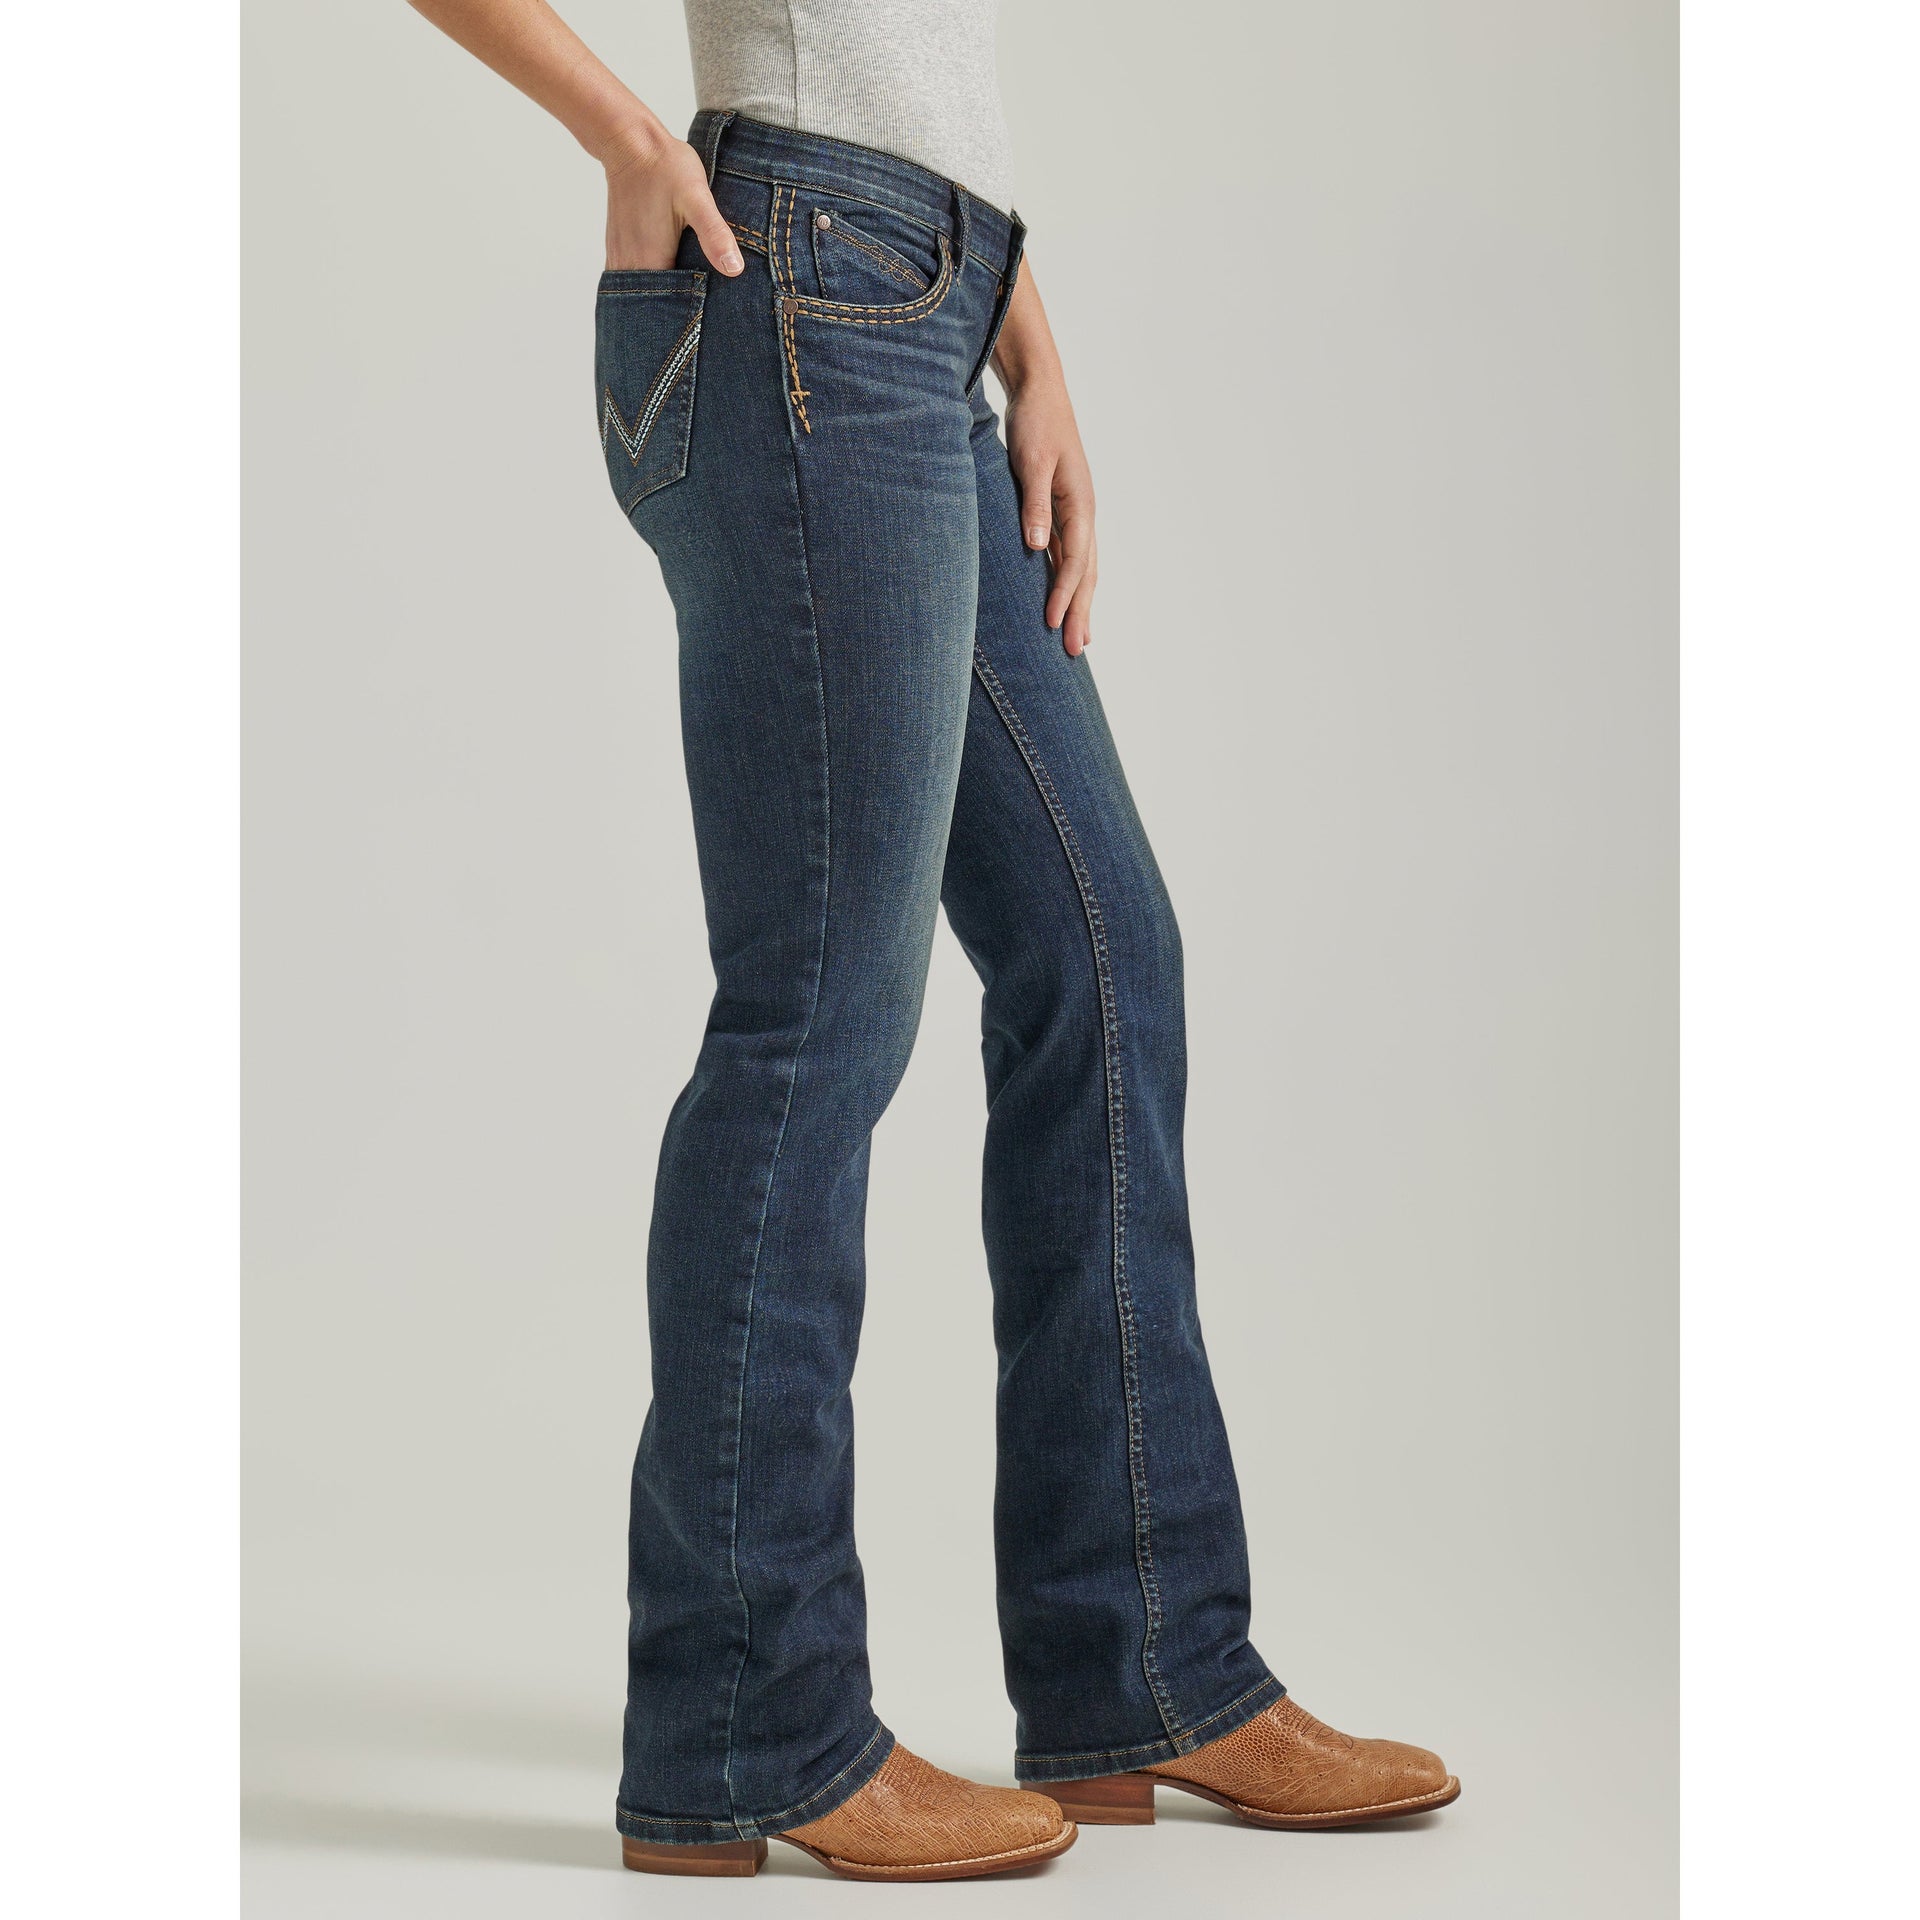 Wrangler Black Mid-Rise Boot Cut Jeans - Gass Horse Supply